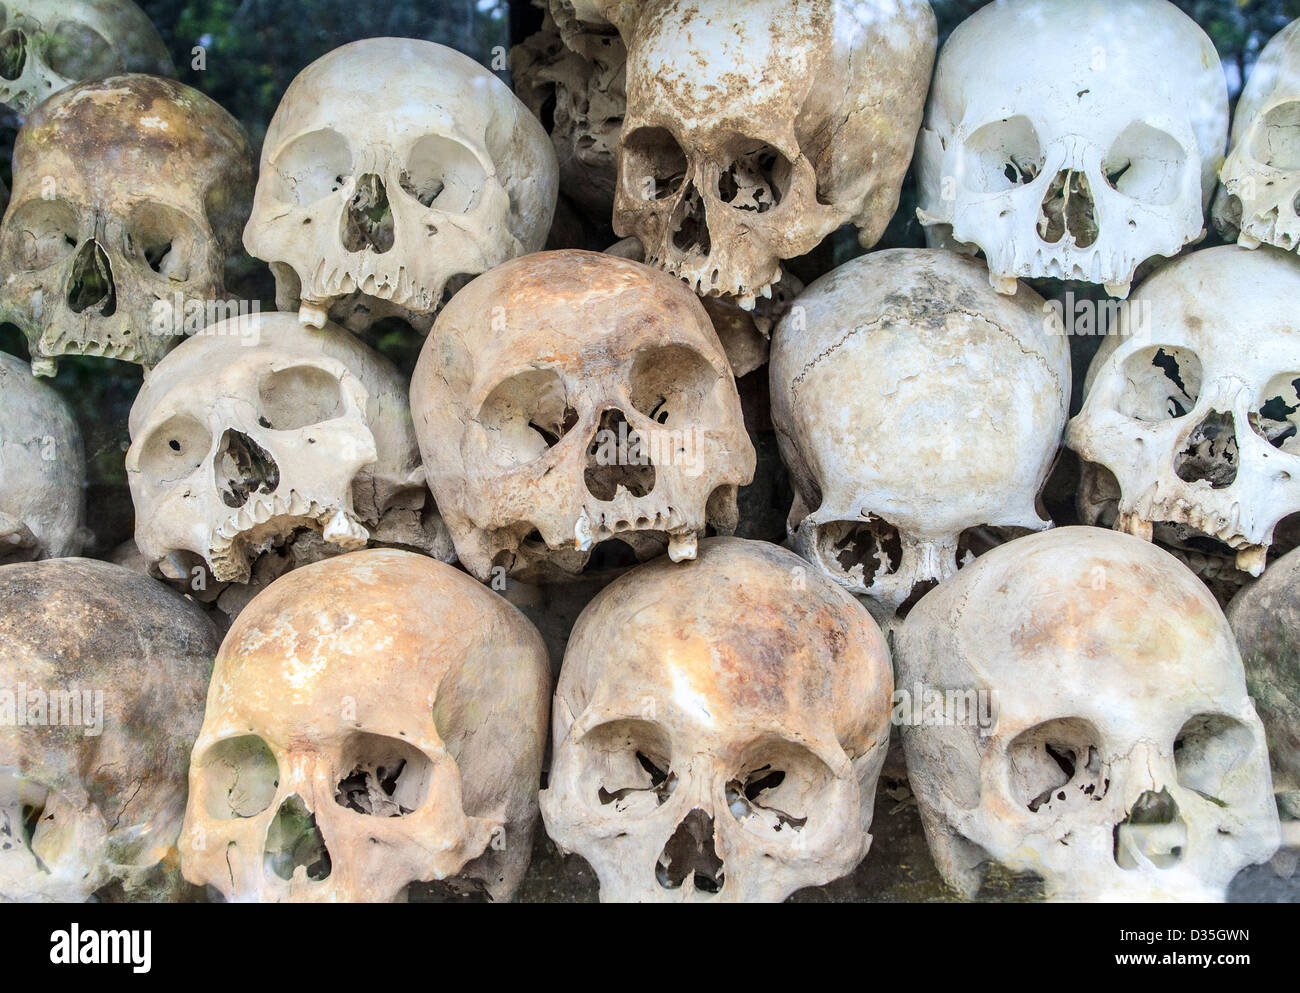 Skulls from Choeung Ek Killing Field, nine miles southwest of Phnom Penh, where thousands of Cambodian people were killed Stock Photo